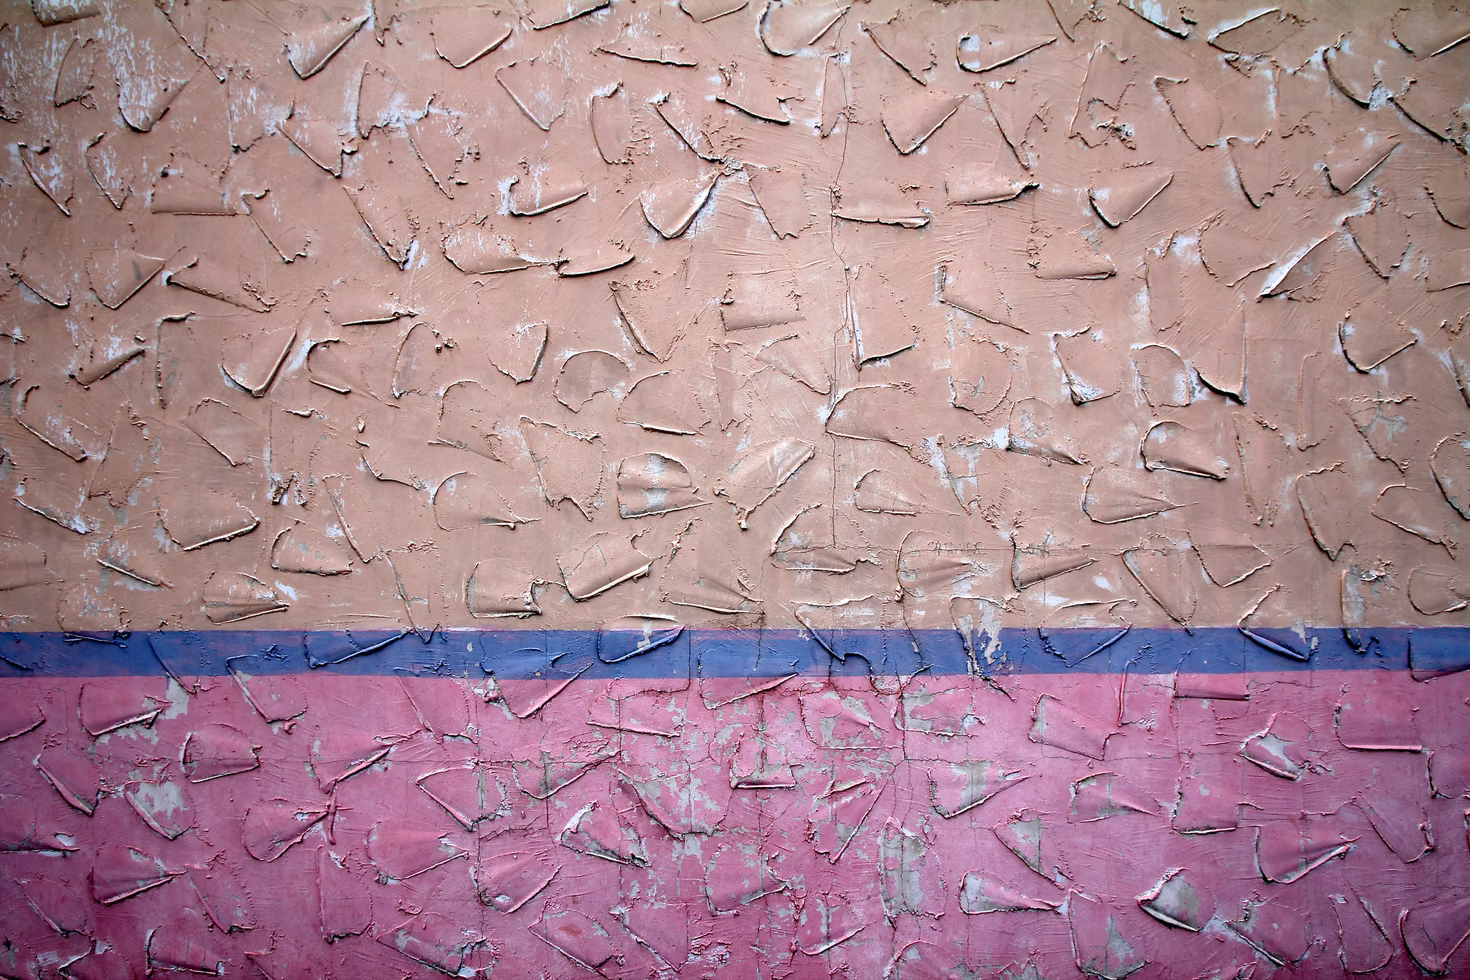 Image of a brown, purple, and pink wall.